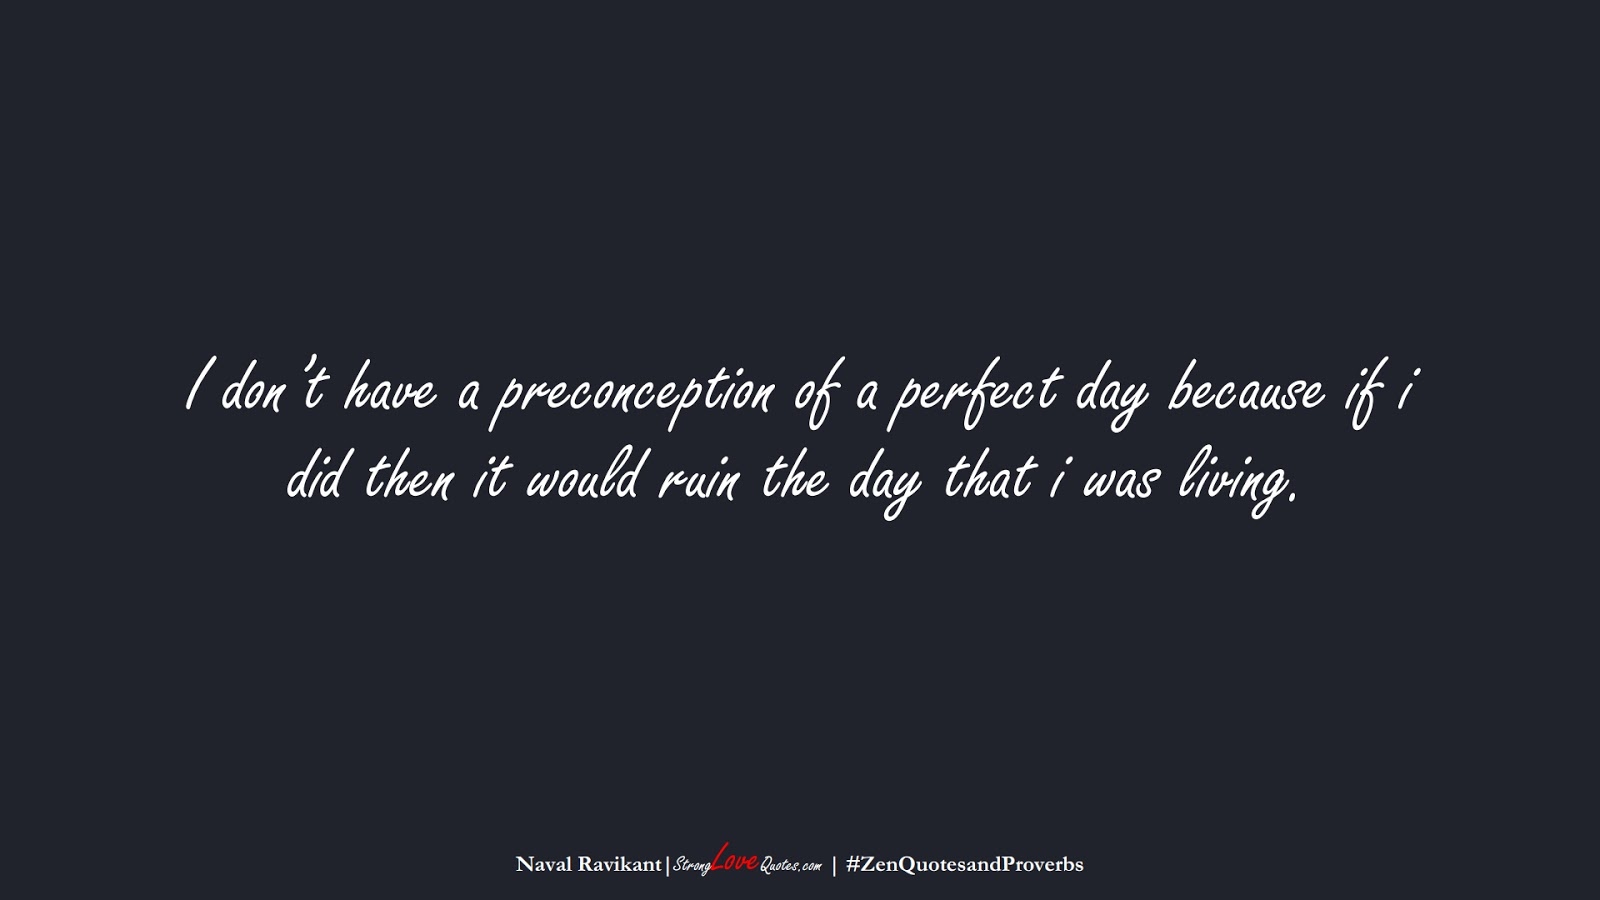 I don’t have a preconception of a perfect day because if i did then it would ruin the day that i was living. (Naval Ravikant);  #ZenQuotesandProverbs